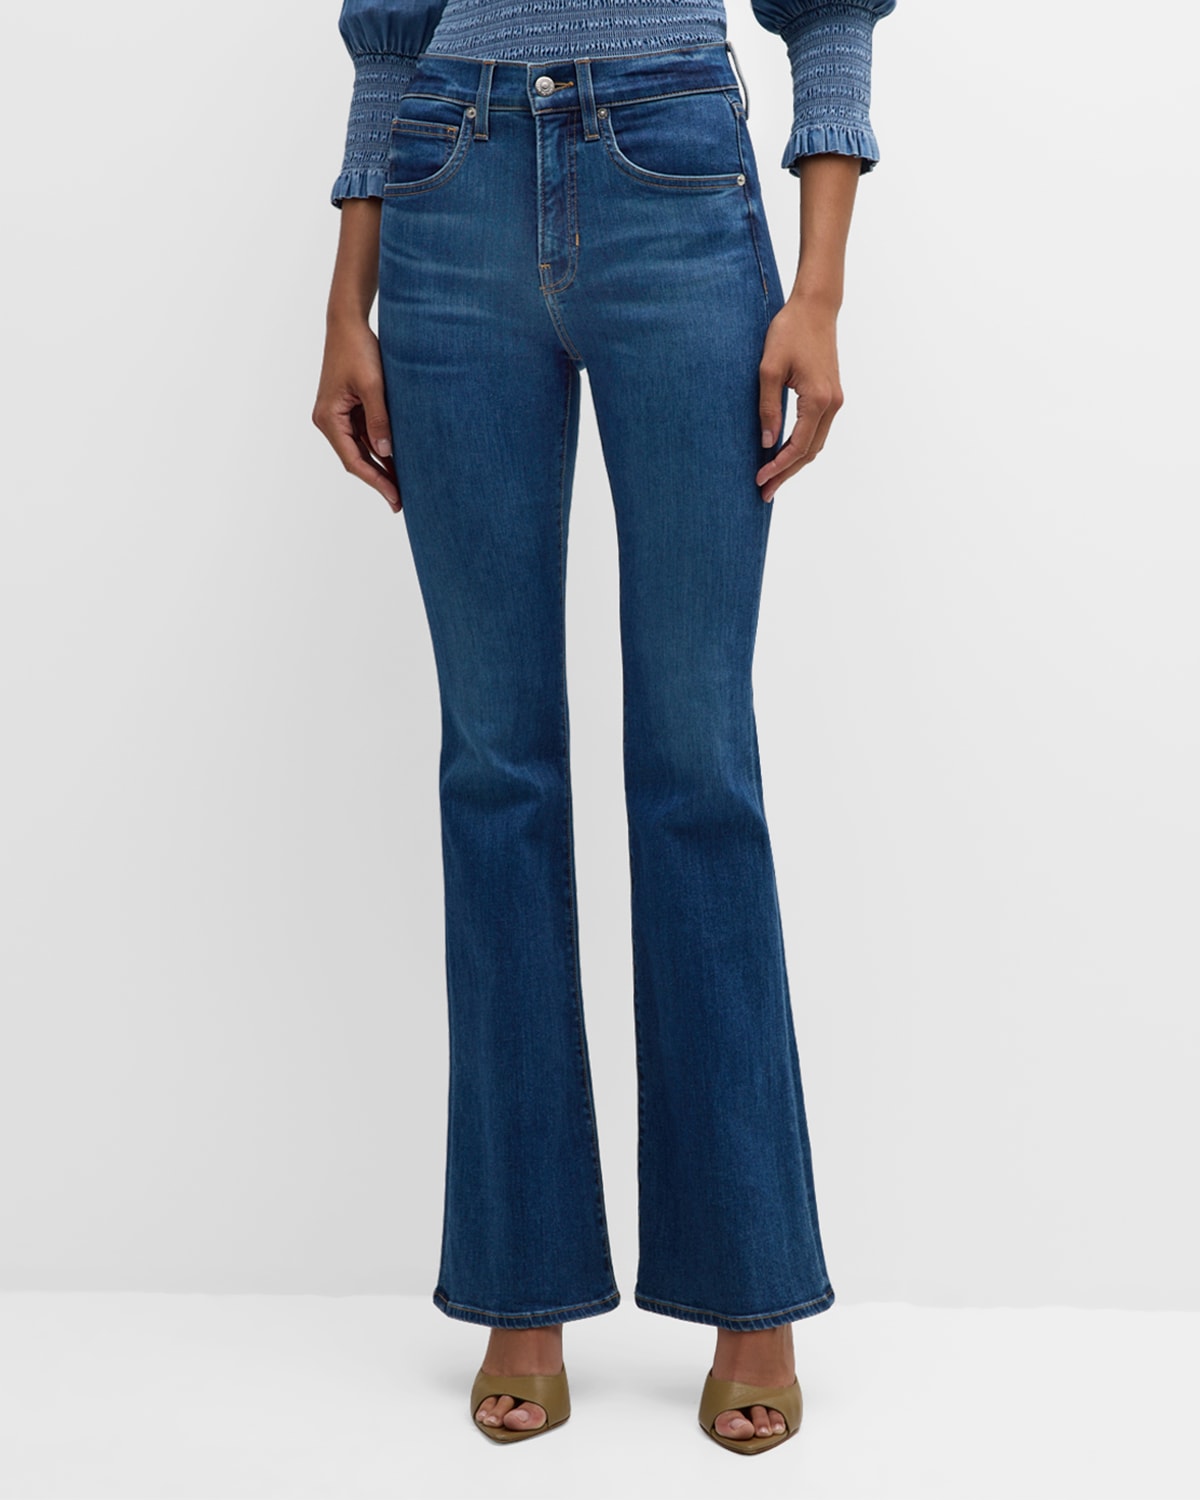 Carly high-rise kick-flare jeans in blue - Veronica Beard